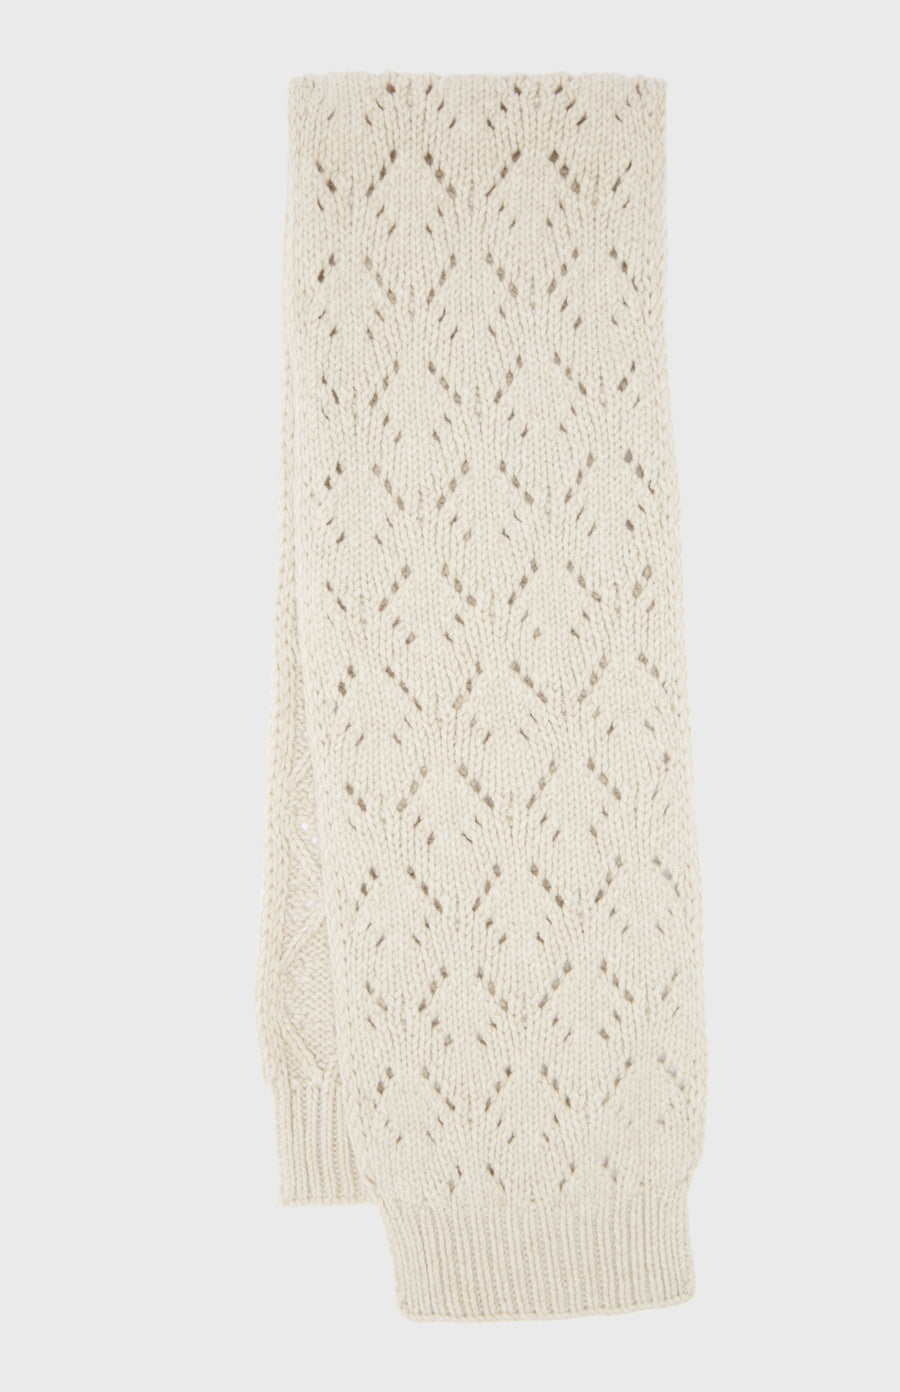 Allover Diamond Eyelet Stitch Scarf In Light Oatmeal